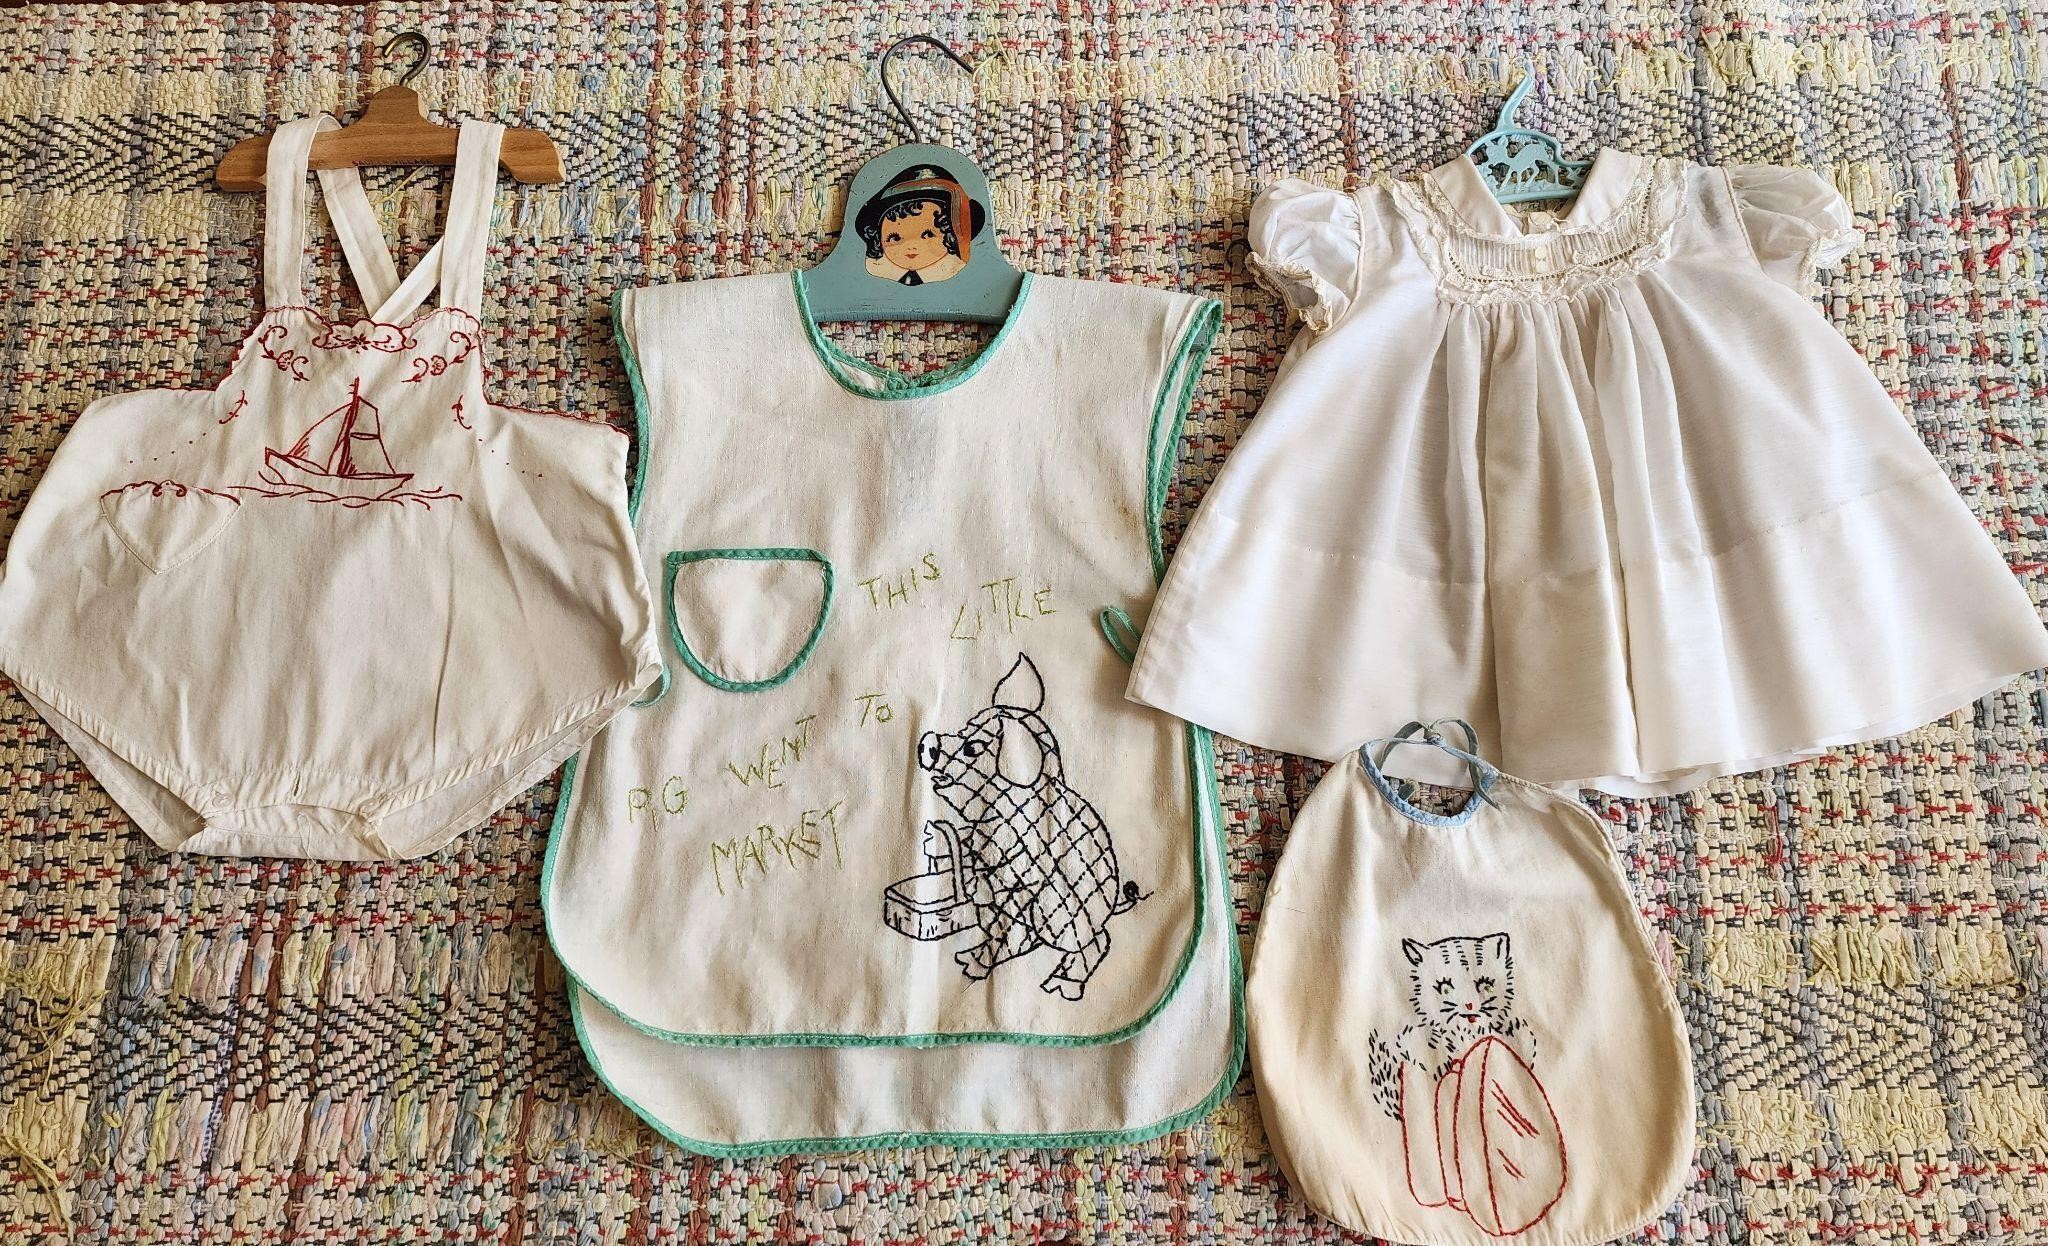 Vintage baby Clothing